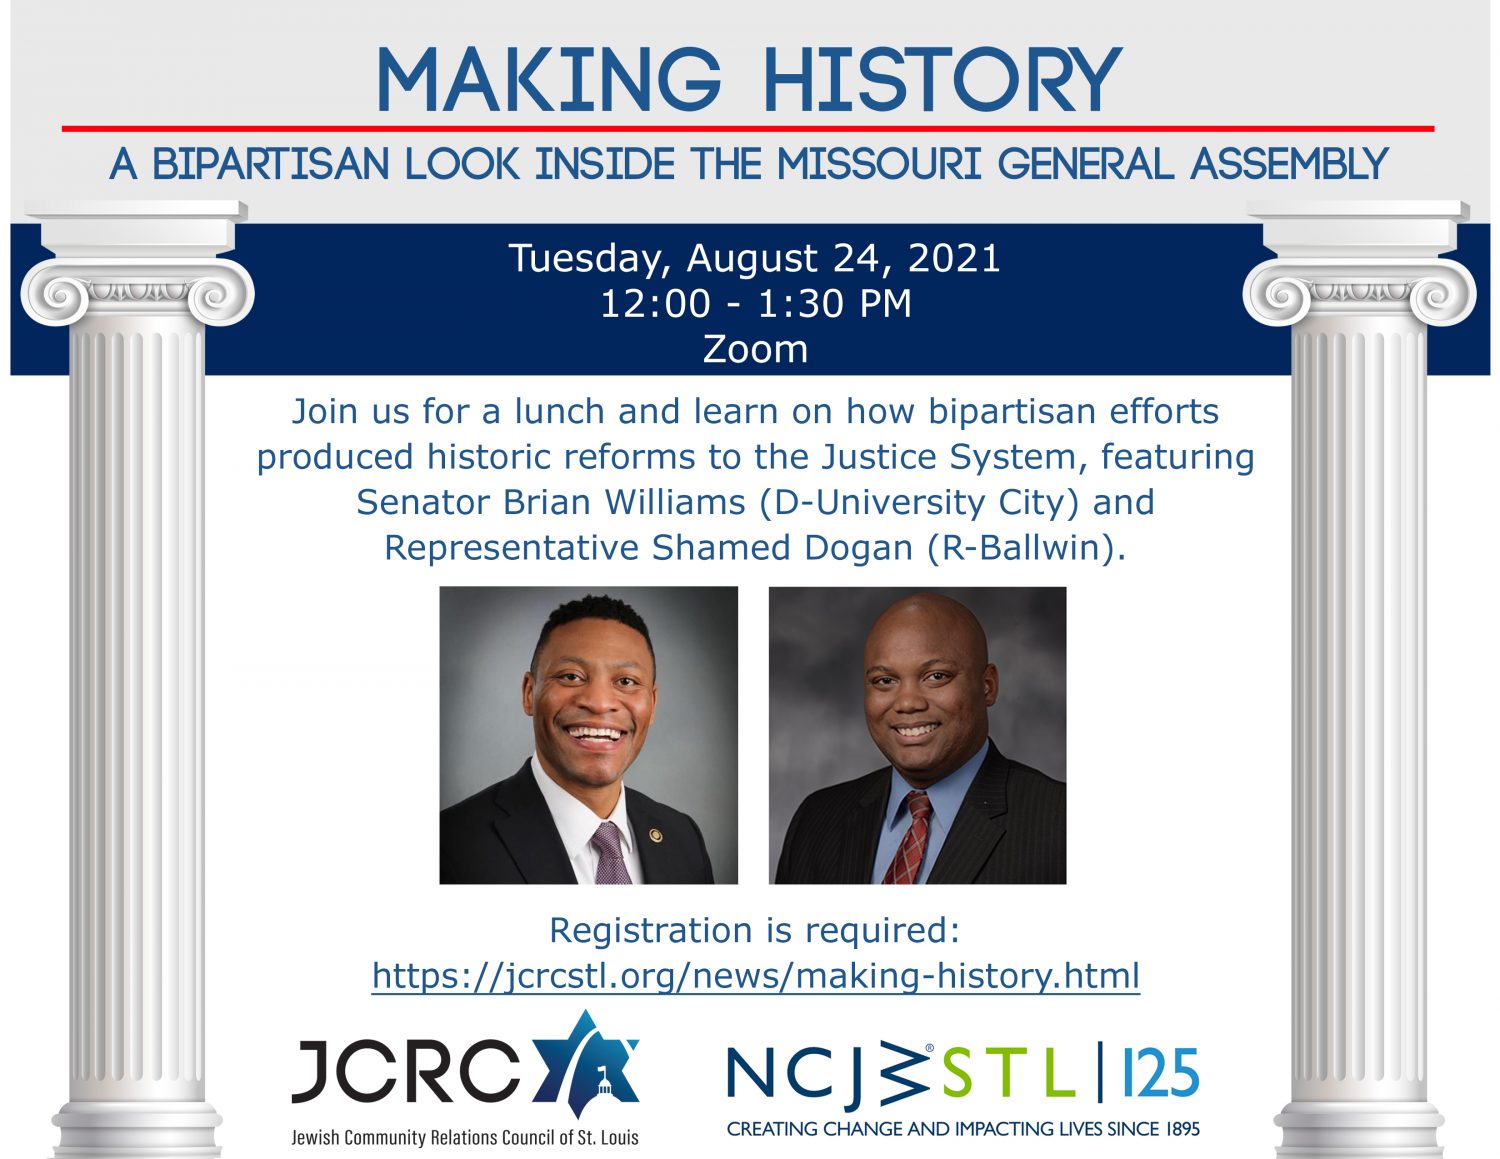 promo graphic for JCRC/NCJWSTL co-sponsored Zoom: "Making History - A Bipartisan Look Inside the Missouri General Assembly. Tuesday, August 24, 2021, 12:00 - 1:30 PM, Zoom. Join us for a lunch and learn on how bipartisan efforts produced historic reforms to the Justice System, featuring Senator Brian Williams (D-University City) and Representative Shamed Dogan (R-Ballwin)."